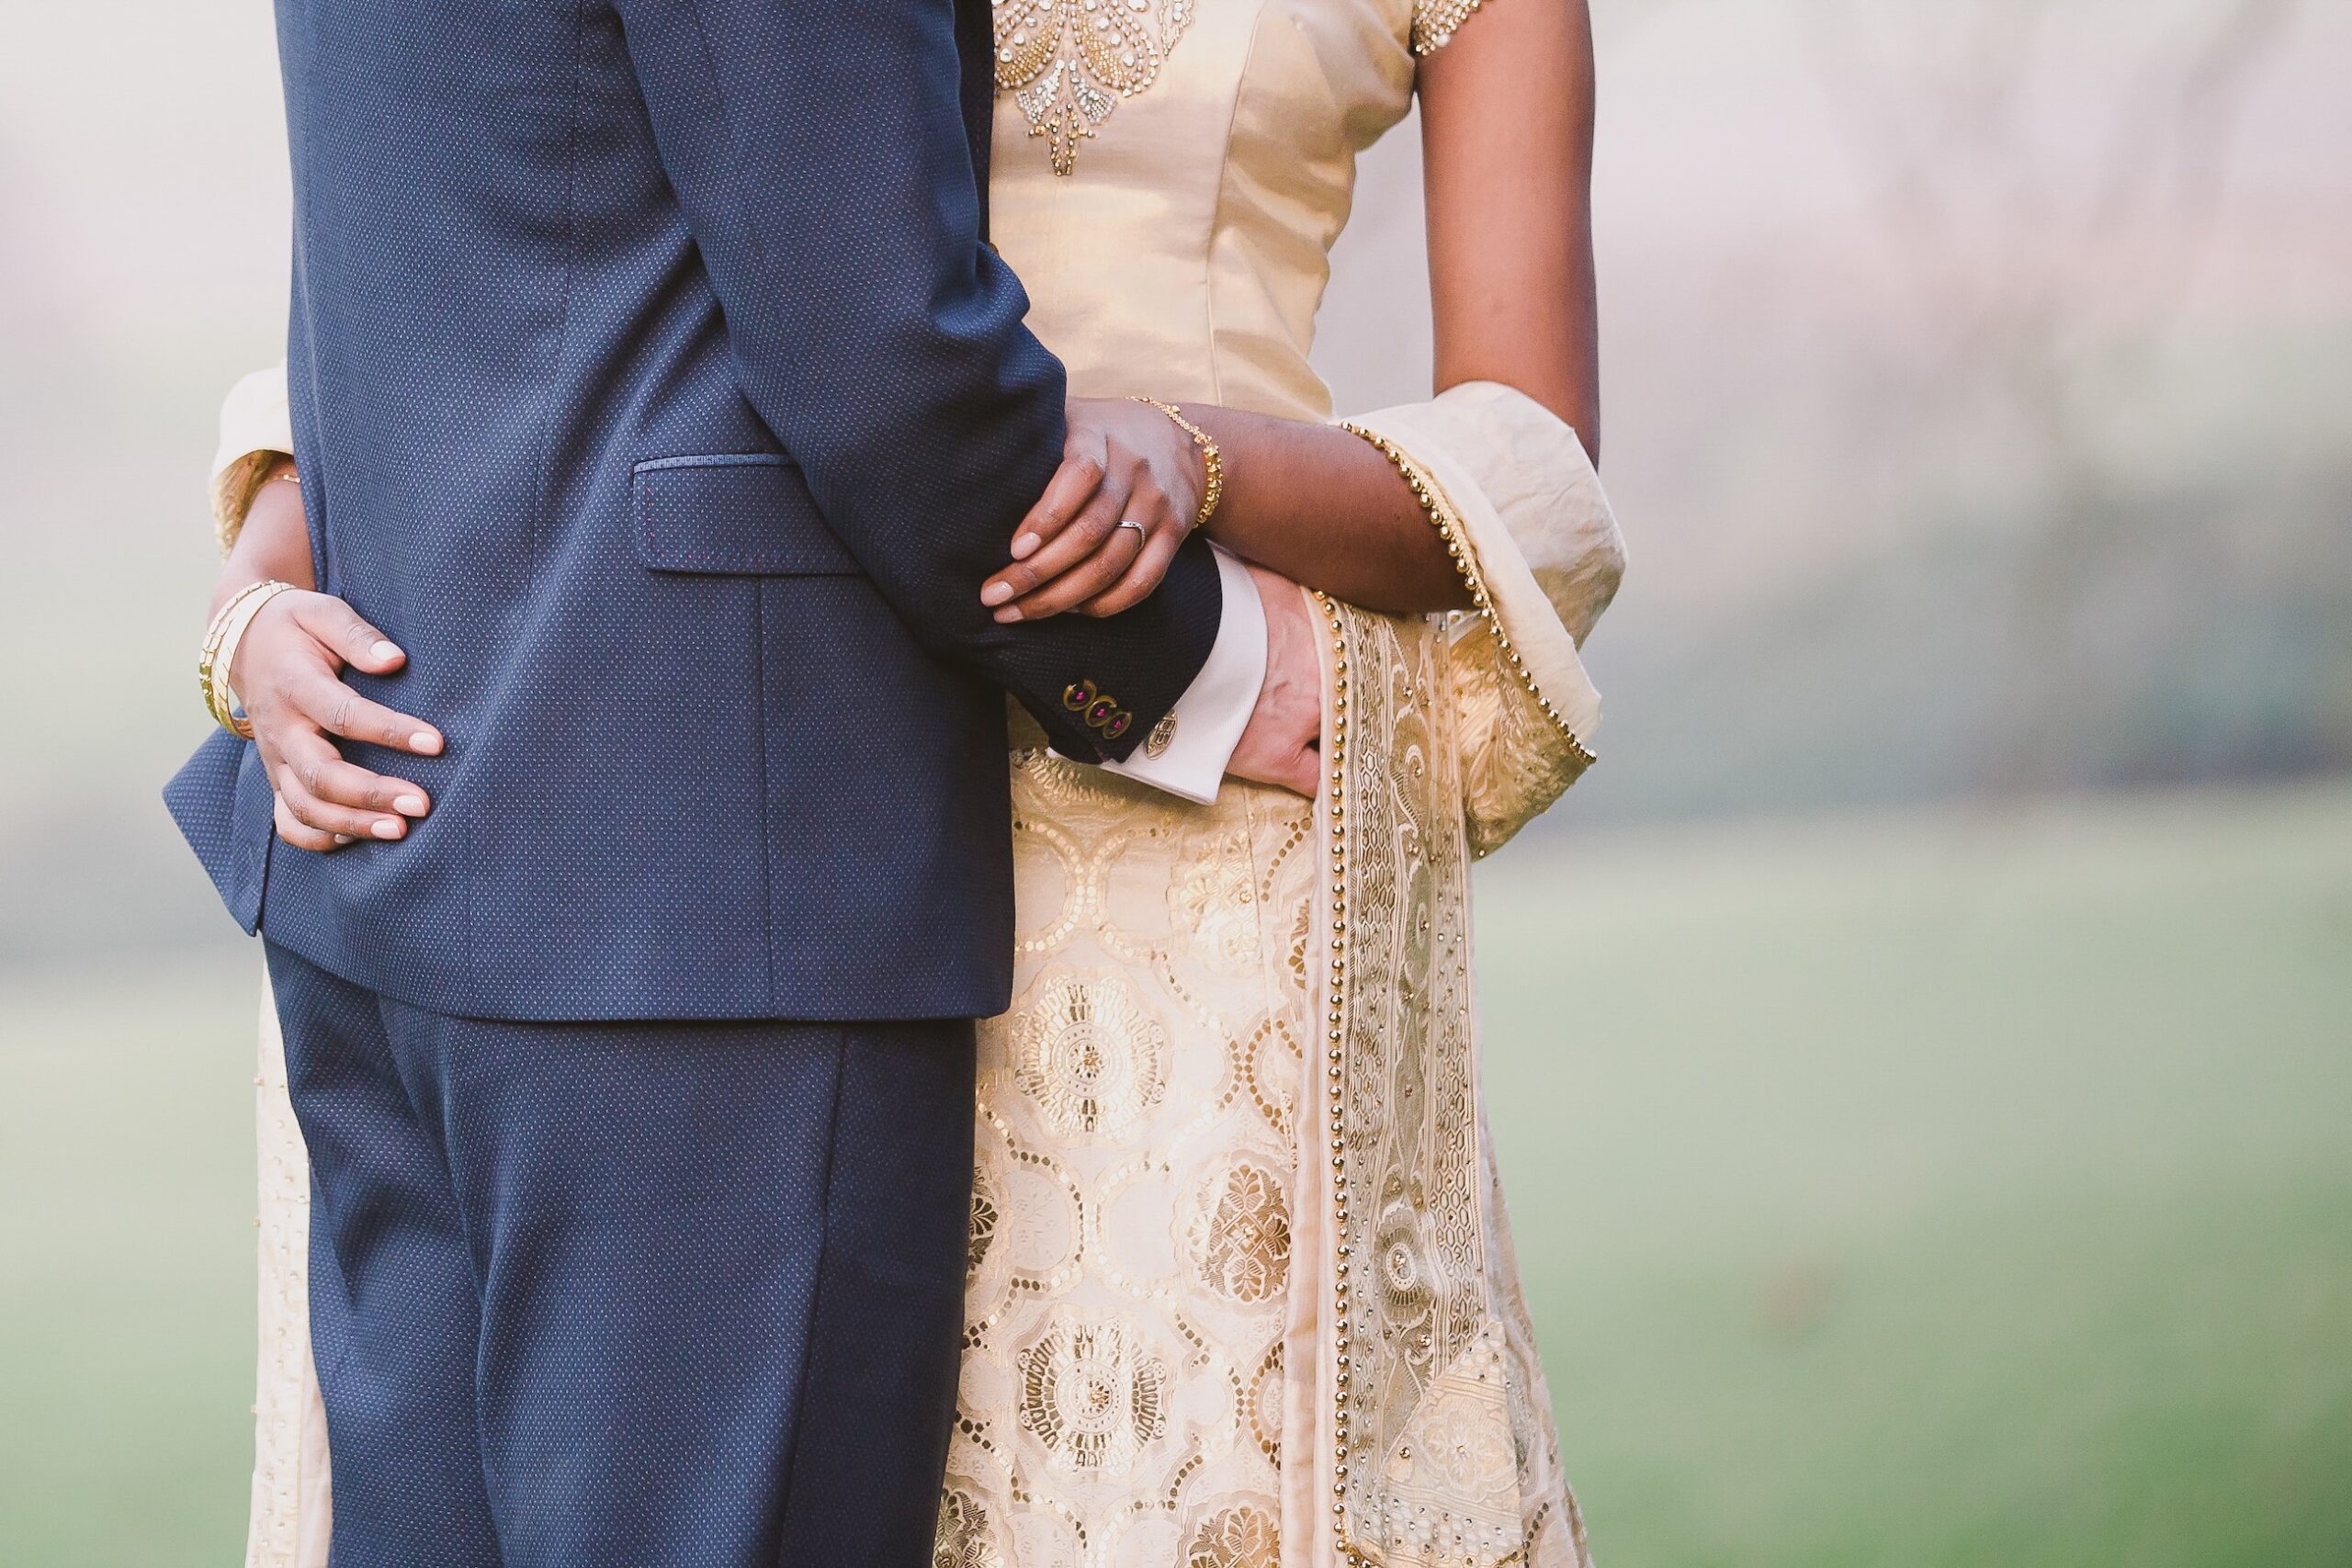 Two People Holding Each Other at a Wedding